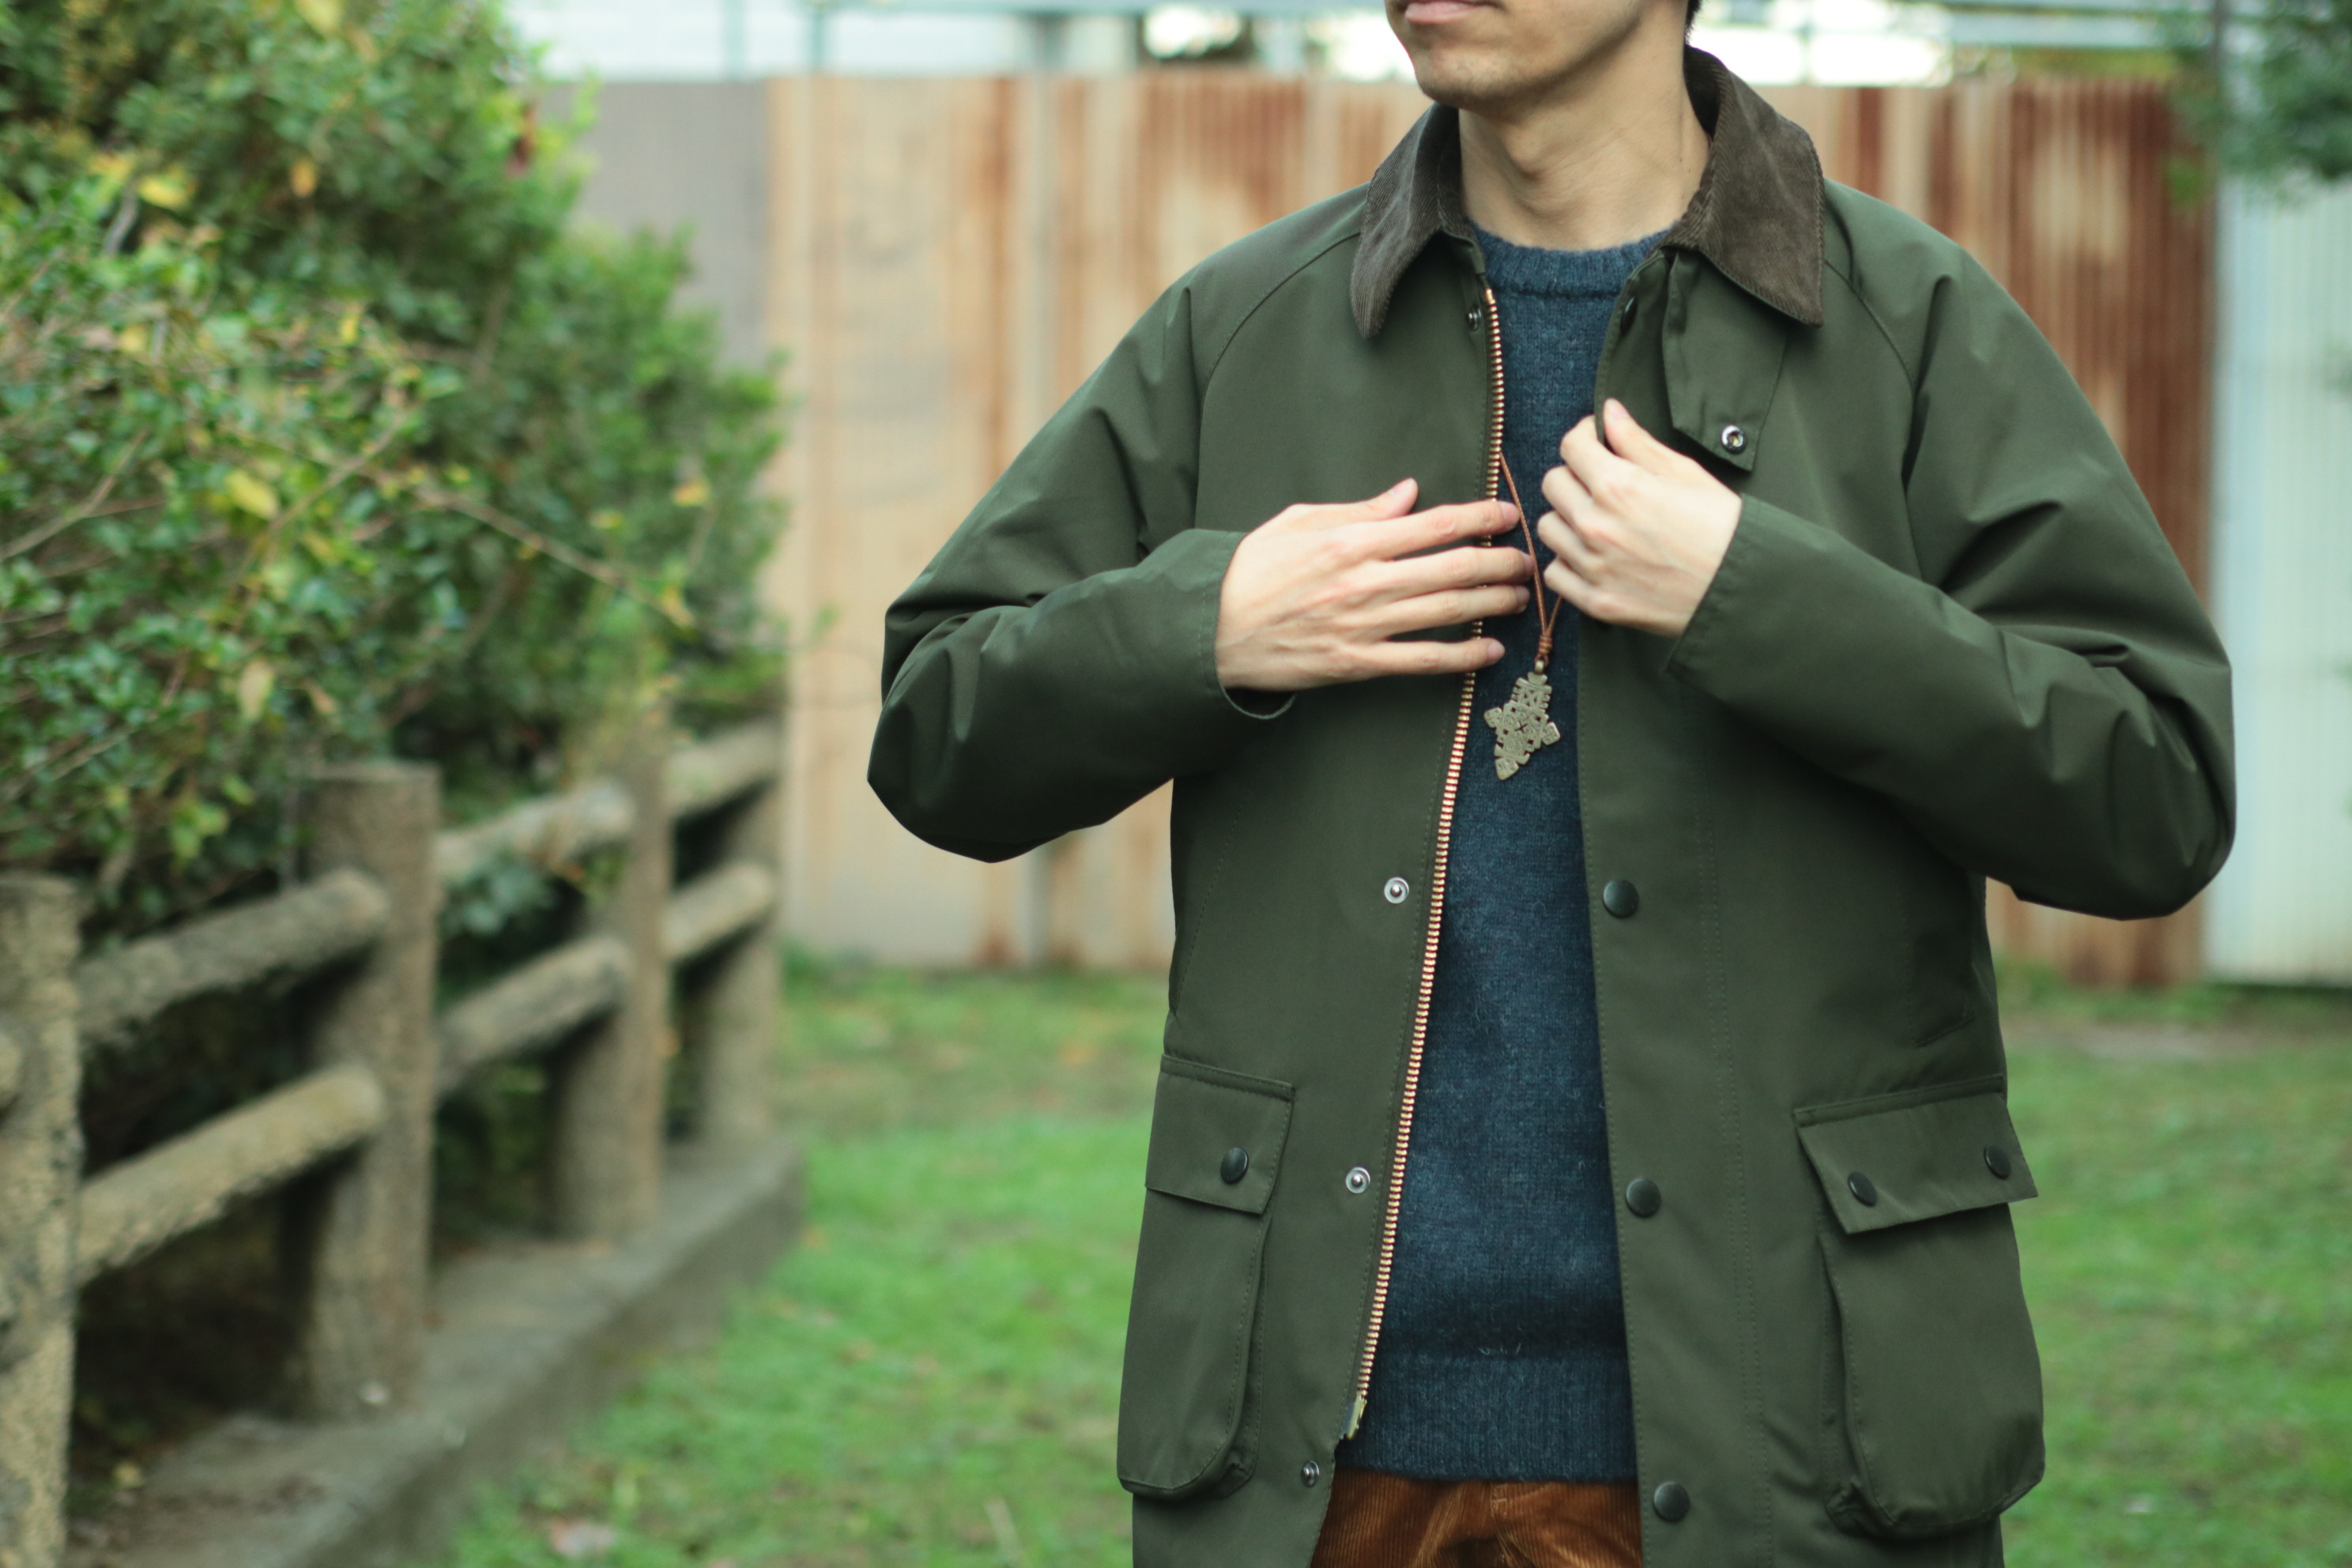 【BARBOUR】BEDALE SL 2LAYER